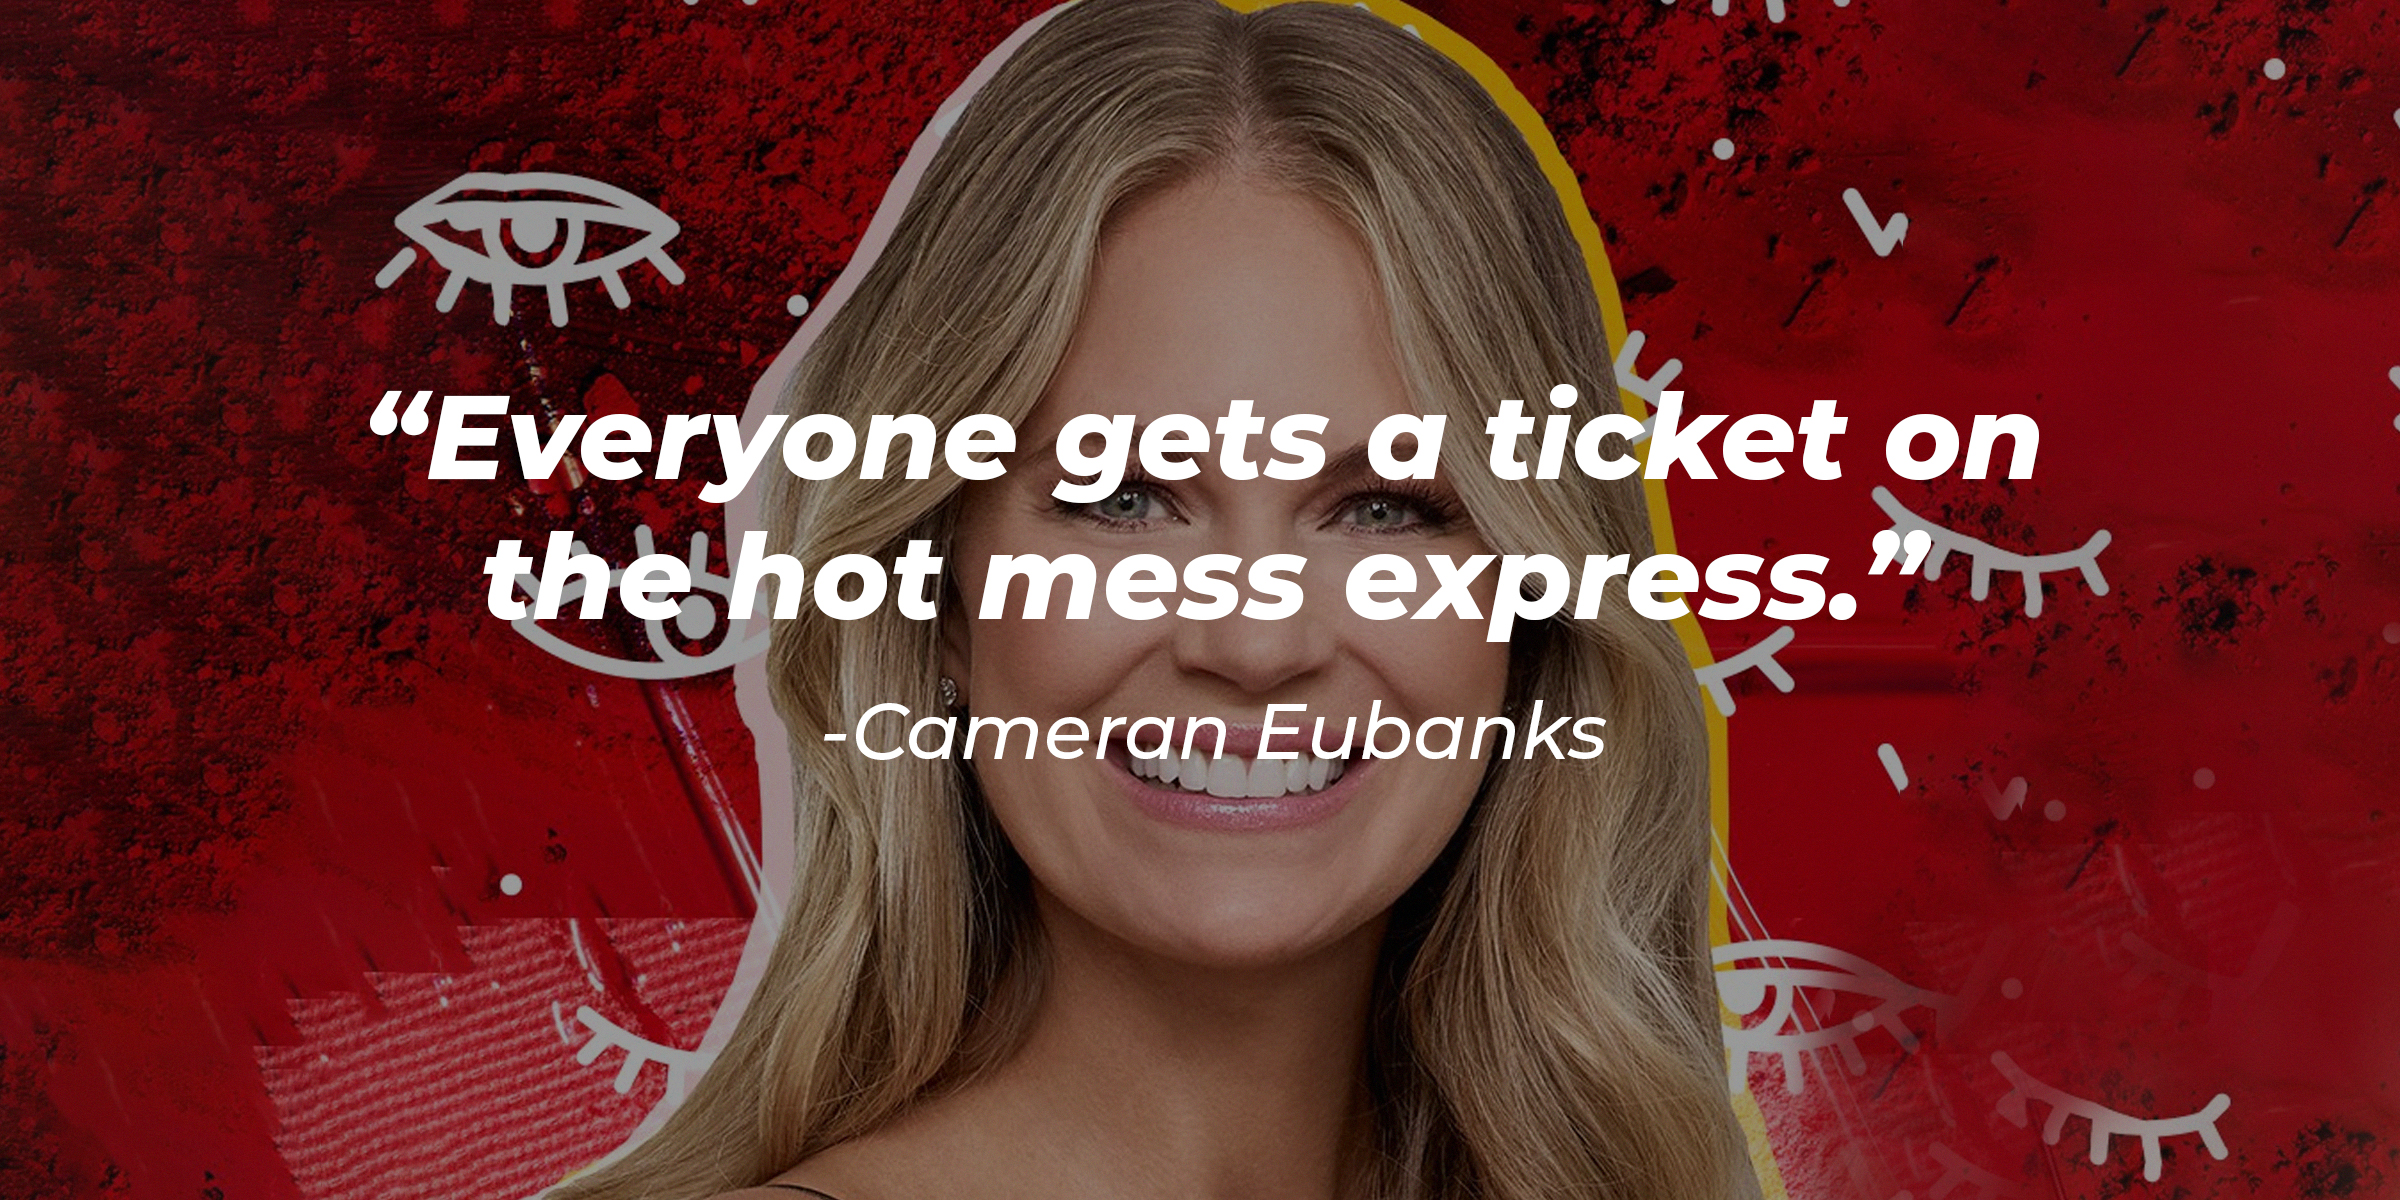 Cameran Eubanks' quote: "Everyone gets a ticket on the hot mess express." | Source: Facebook.com/SouthernCharmBravo